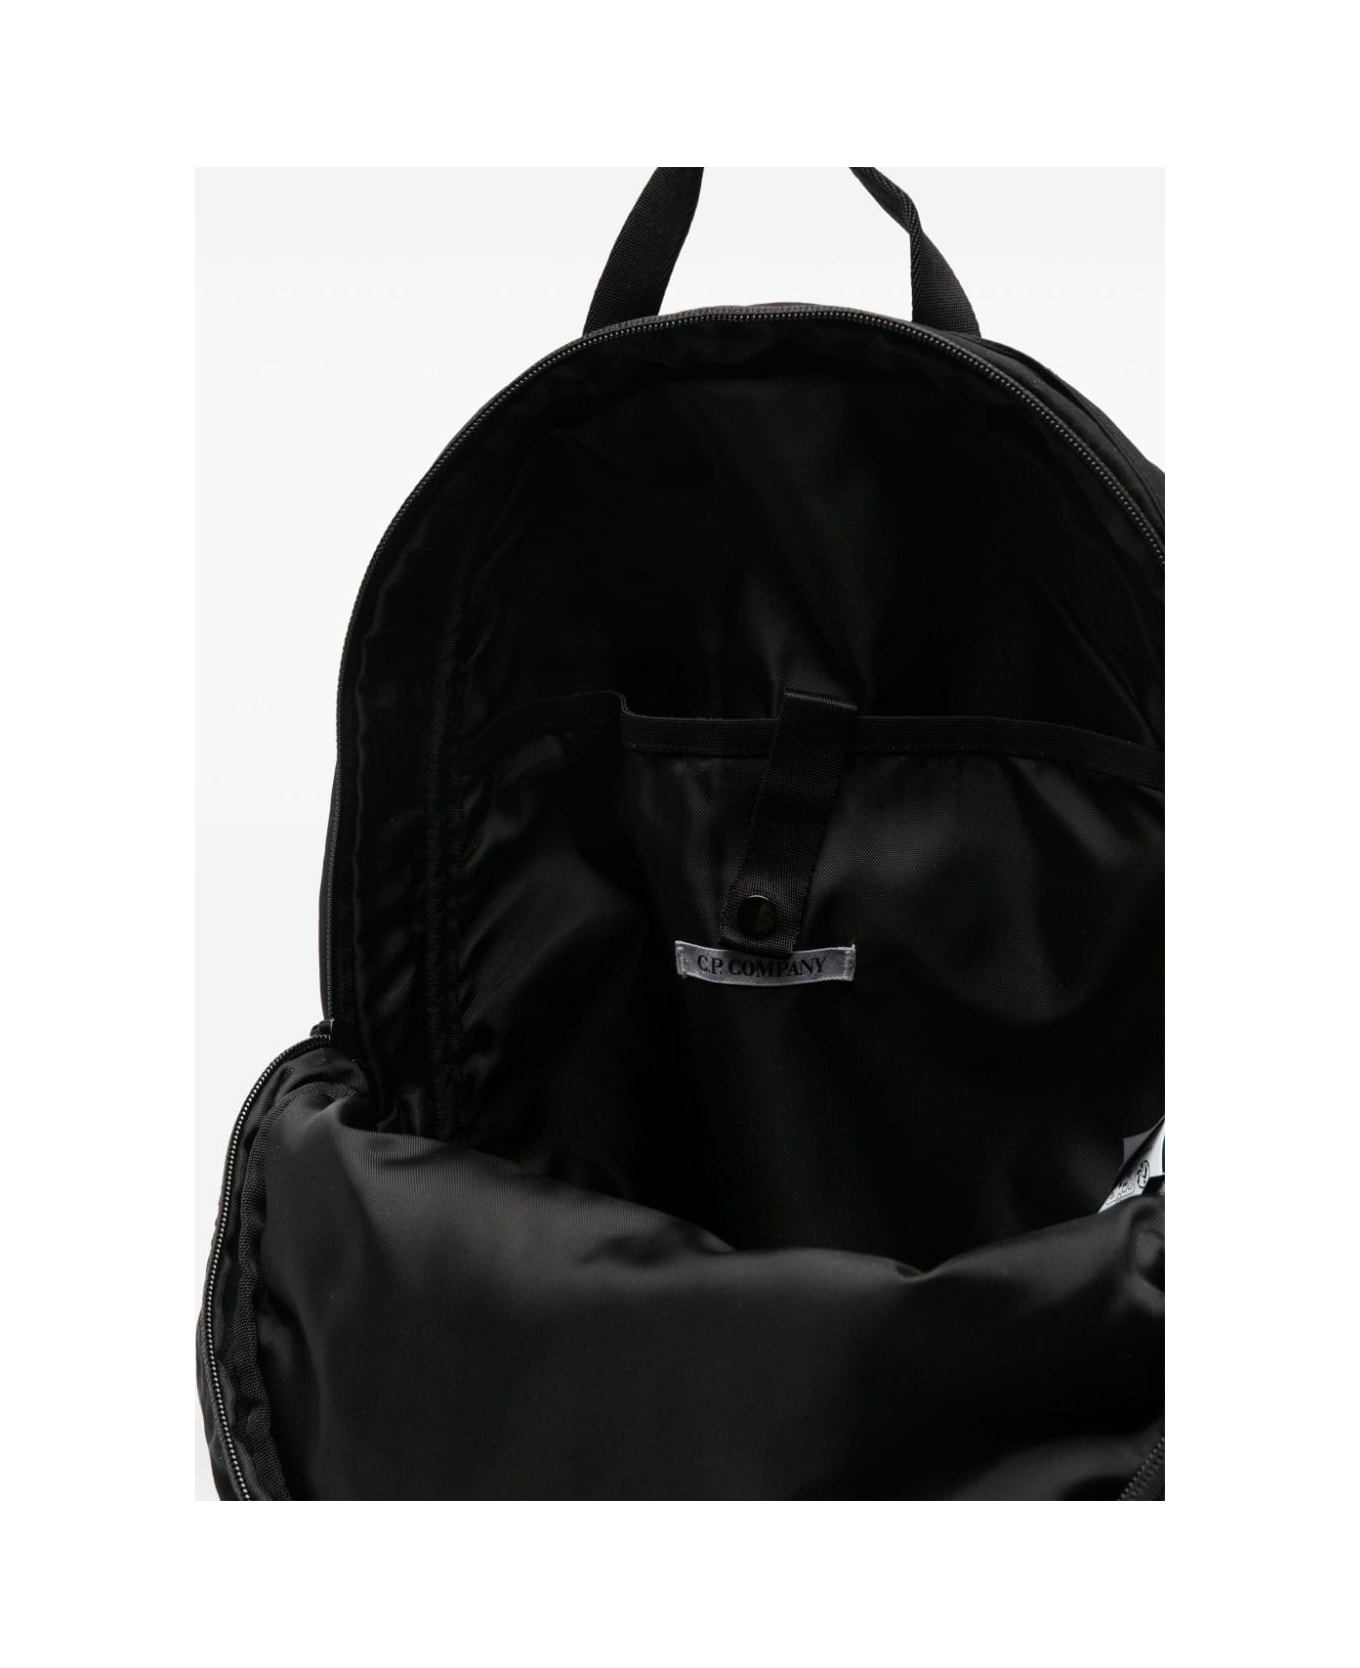 C.P. Company Undersixteen Laptop Backpack With Application - Black